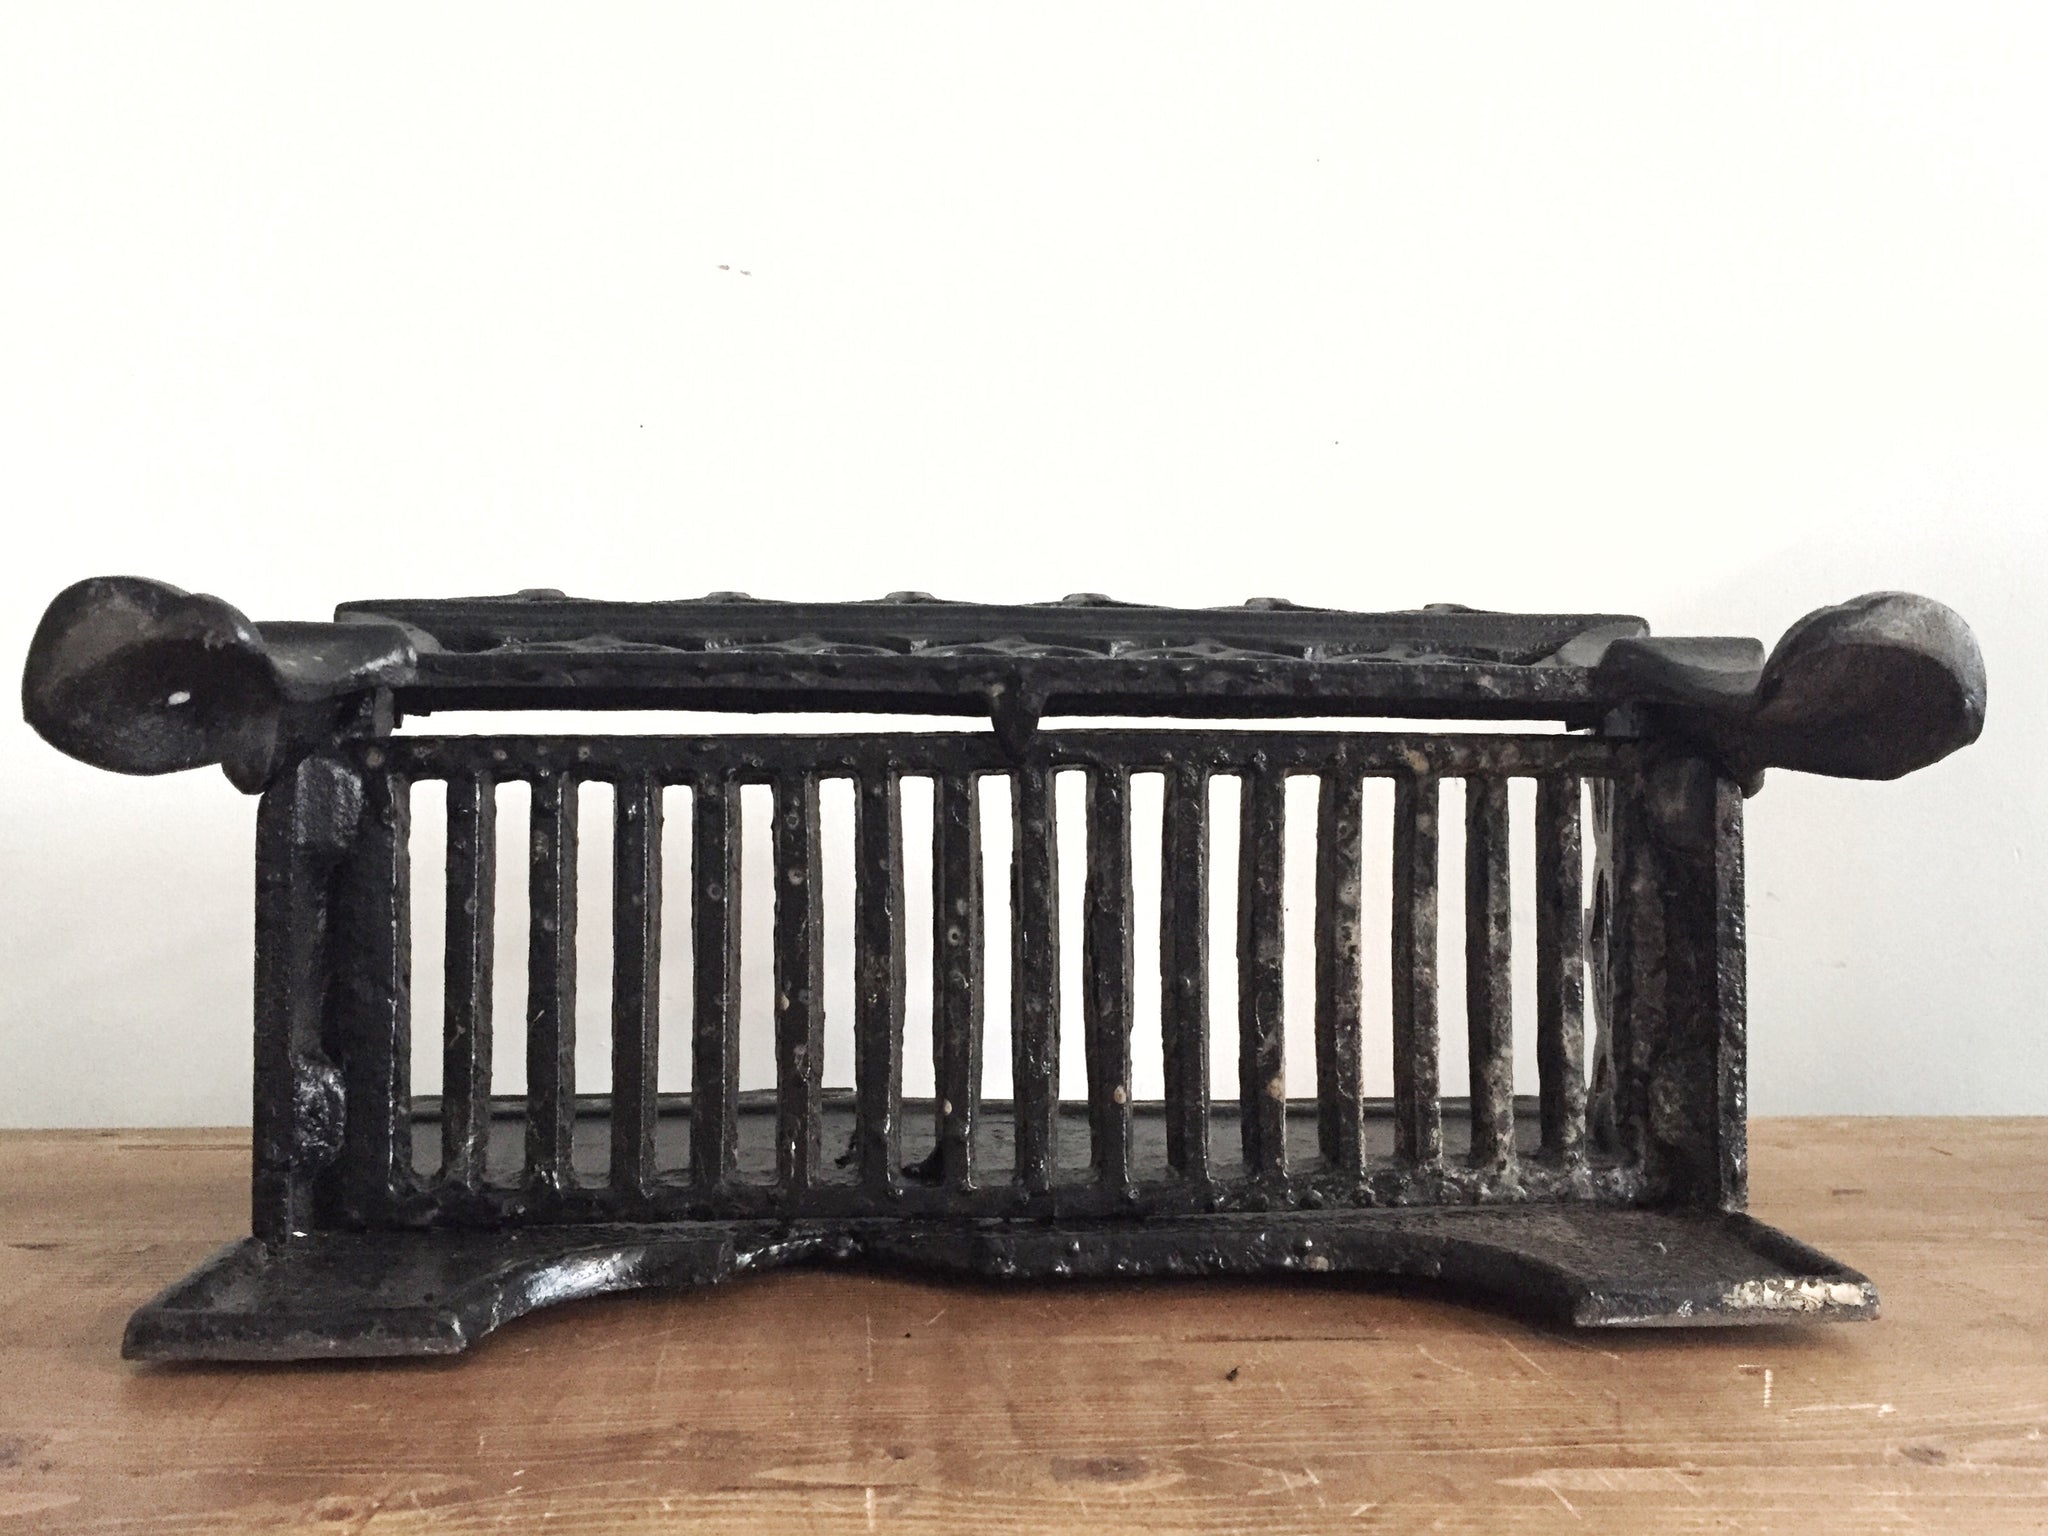 Vintage black wrought iron fire grate a/f has crack